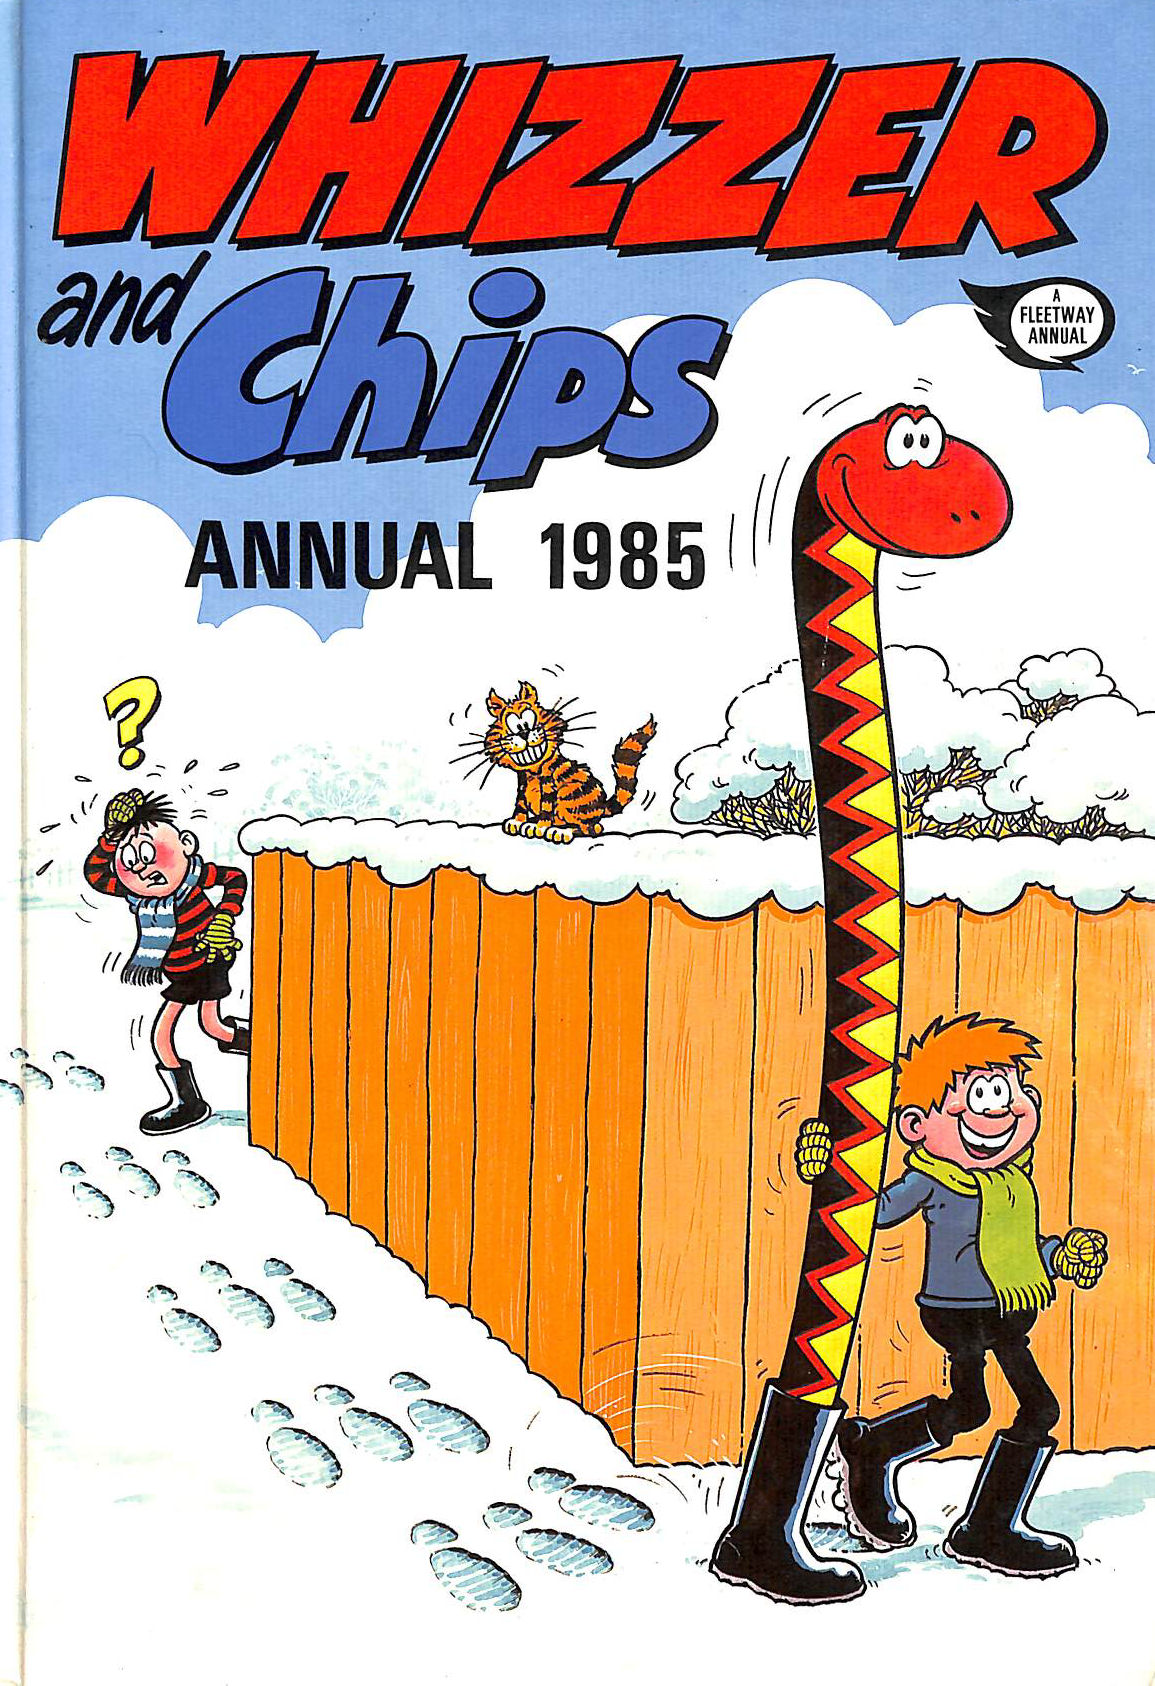 NO AUTHOR - WHIZZER AND CHIPS ANNUAL 1985